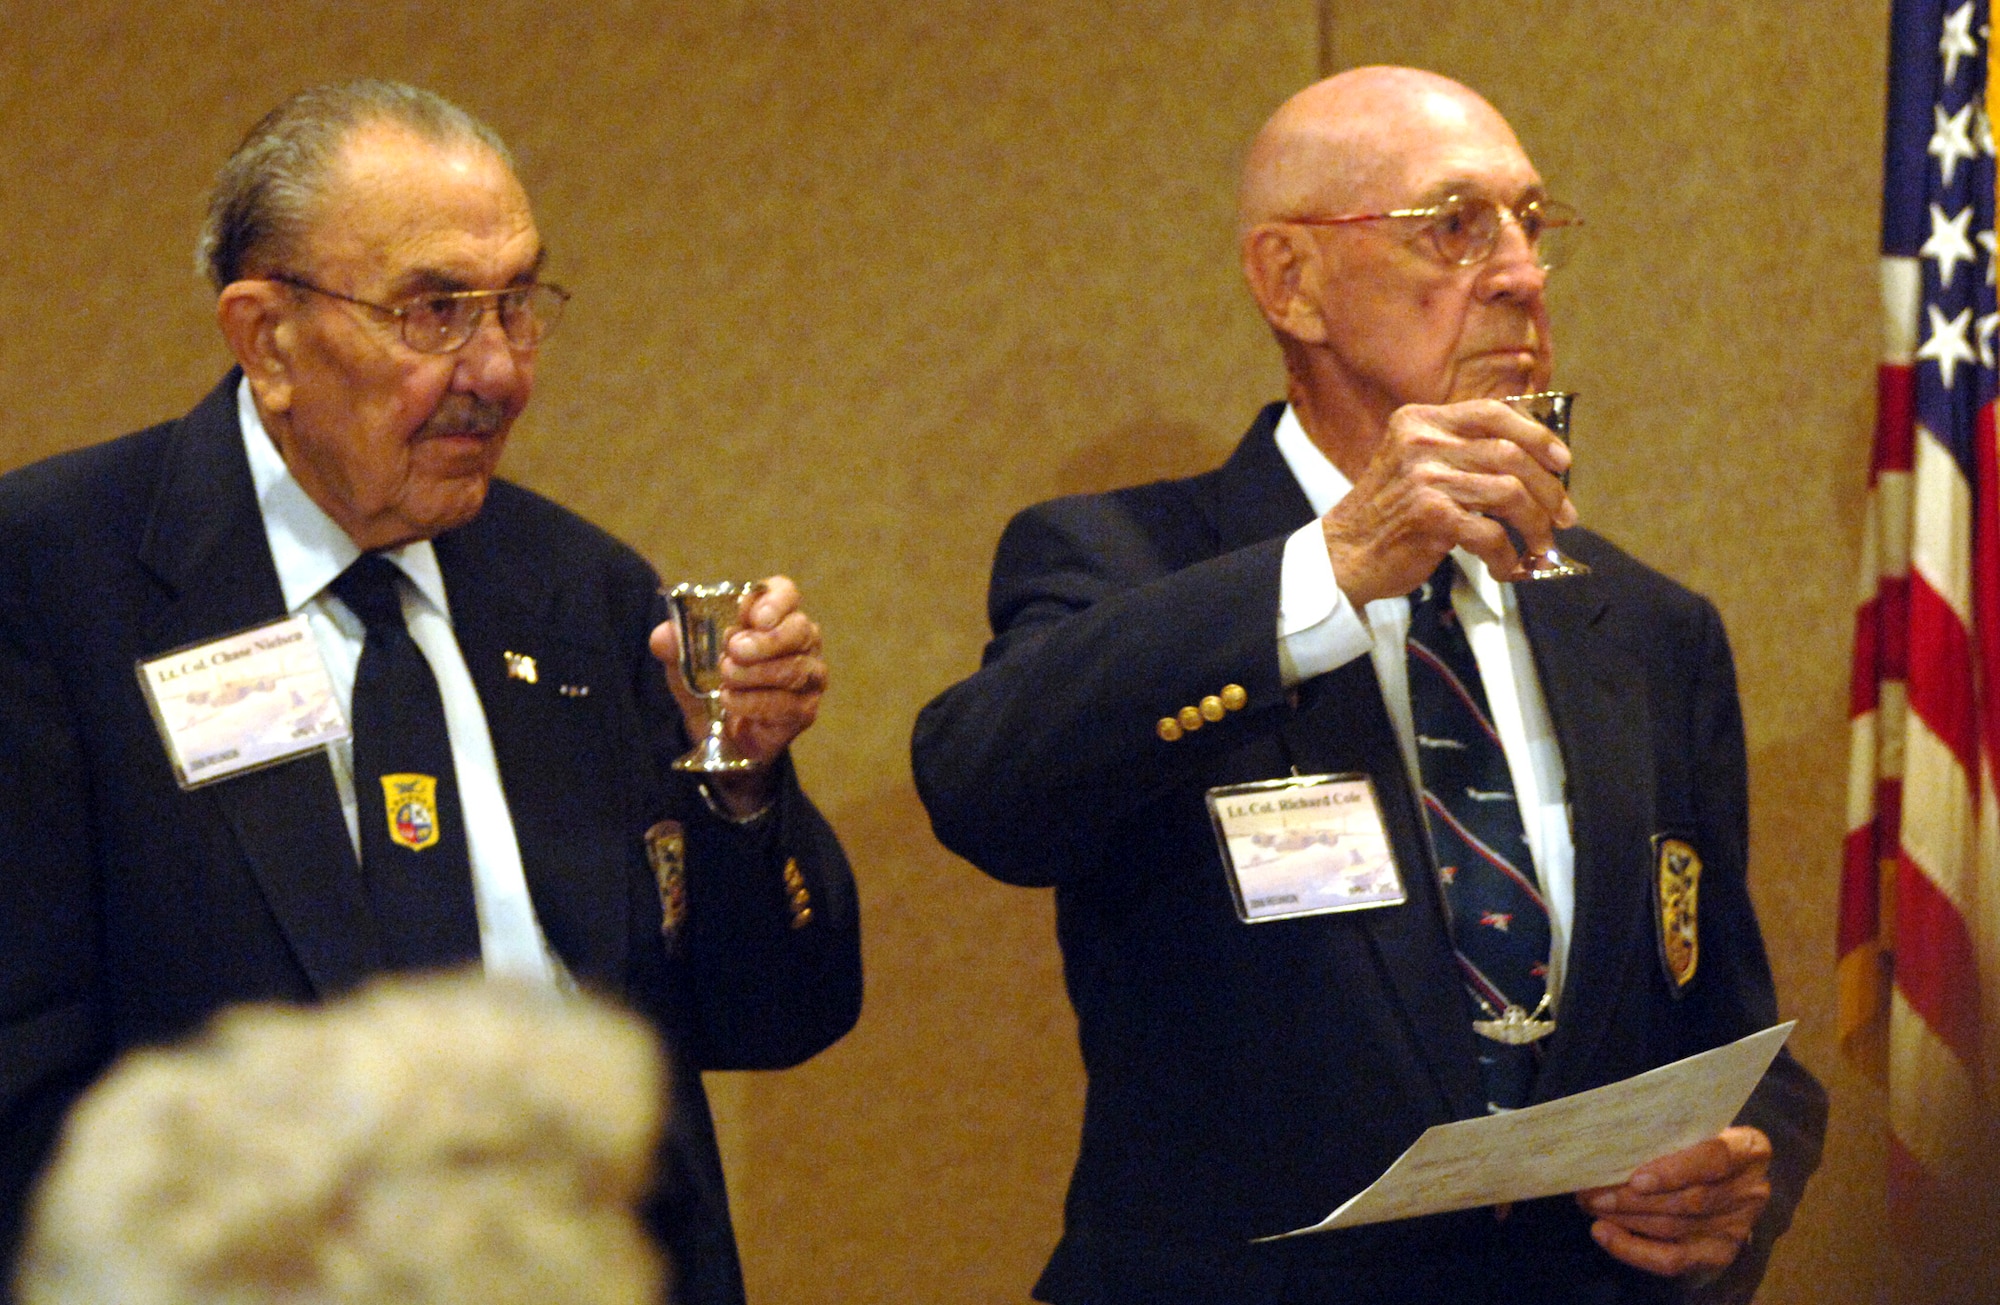 Doolittle Raiders, retired Lt. Col. Dick Cole (right) and retired Lt. Col. Chase Nielsen, raise their goblets to toast their fellow Raiders at the group's 64th reunion in Dayton, Ohio, on Tuesday, April 18, 2006. (U.S. Air Force photo/Tech. Sgt. Cecilio M. Ricardo Jr.)
